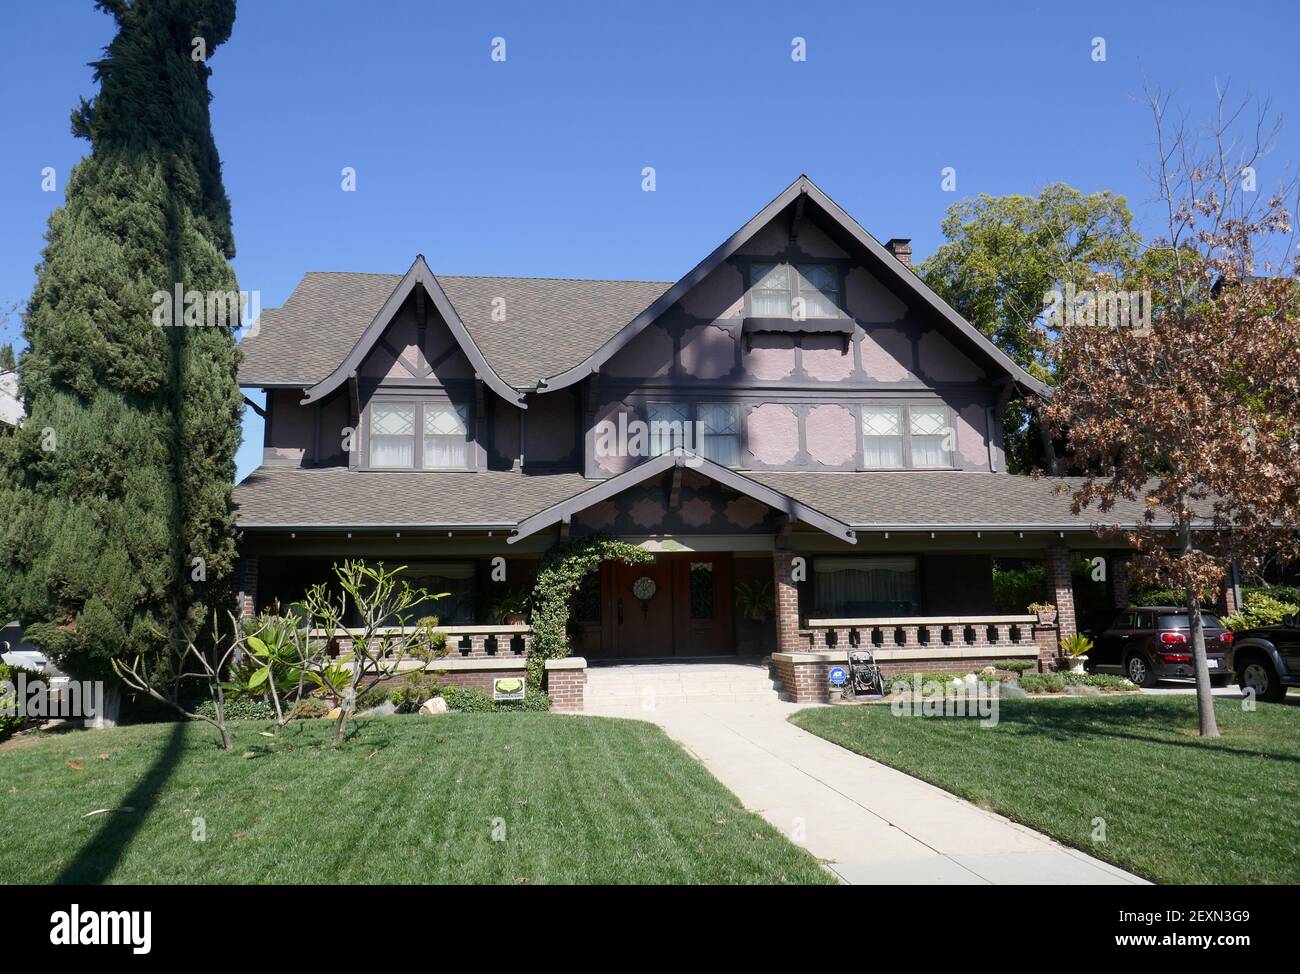 Los Angeles, California, USA 4th March 2021 A general view of atmosphere of The Zeta Alp;ha Zeta Sorority House filming location in The House Bunny Movie at 2151 W. 20th Street on March 4, 2021 in Los Angeles, California, USA. Photo by Barry King/Alamy Stock Photo Stock Photo